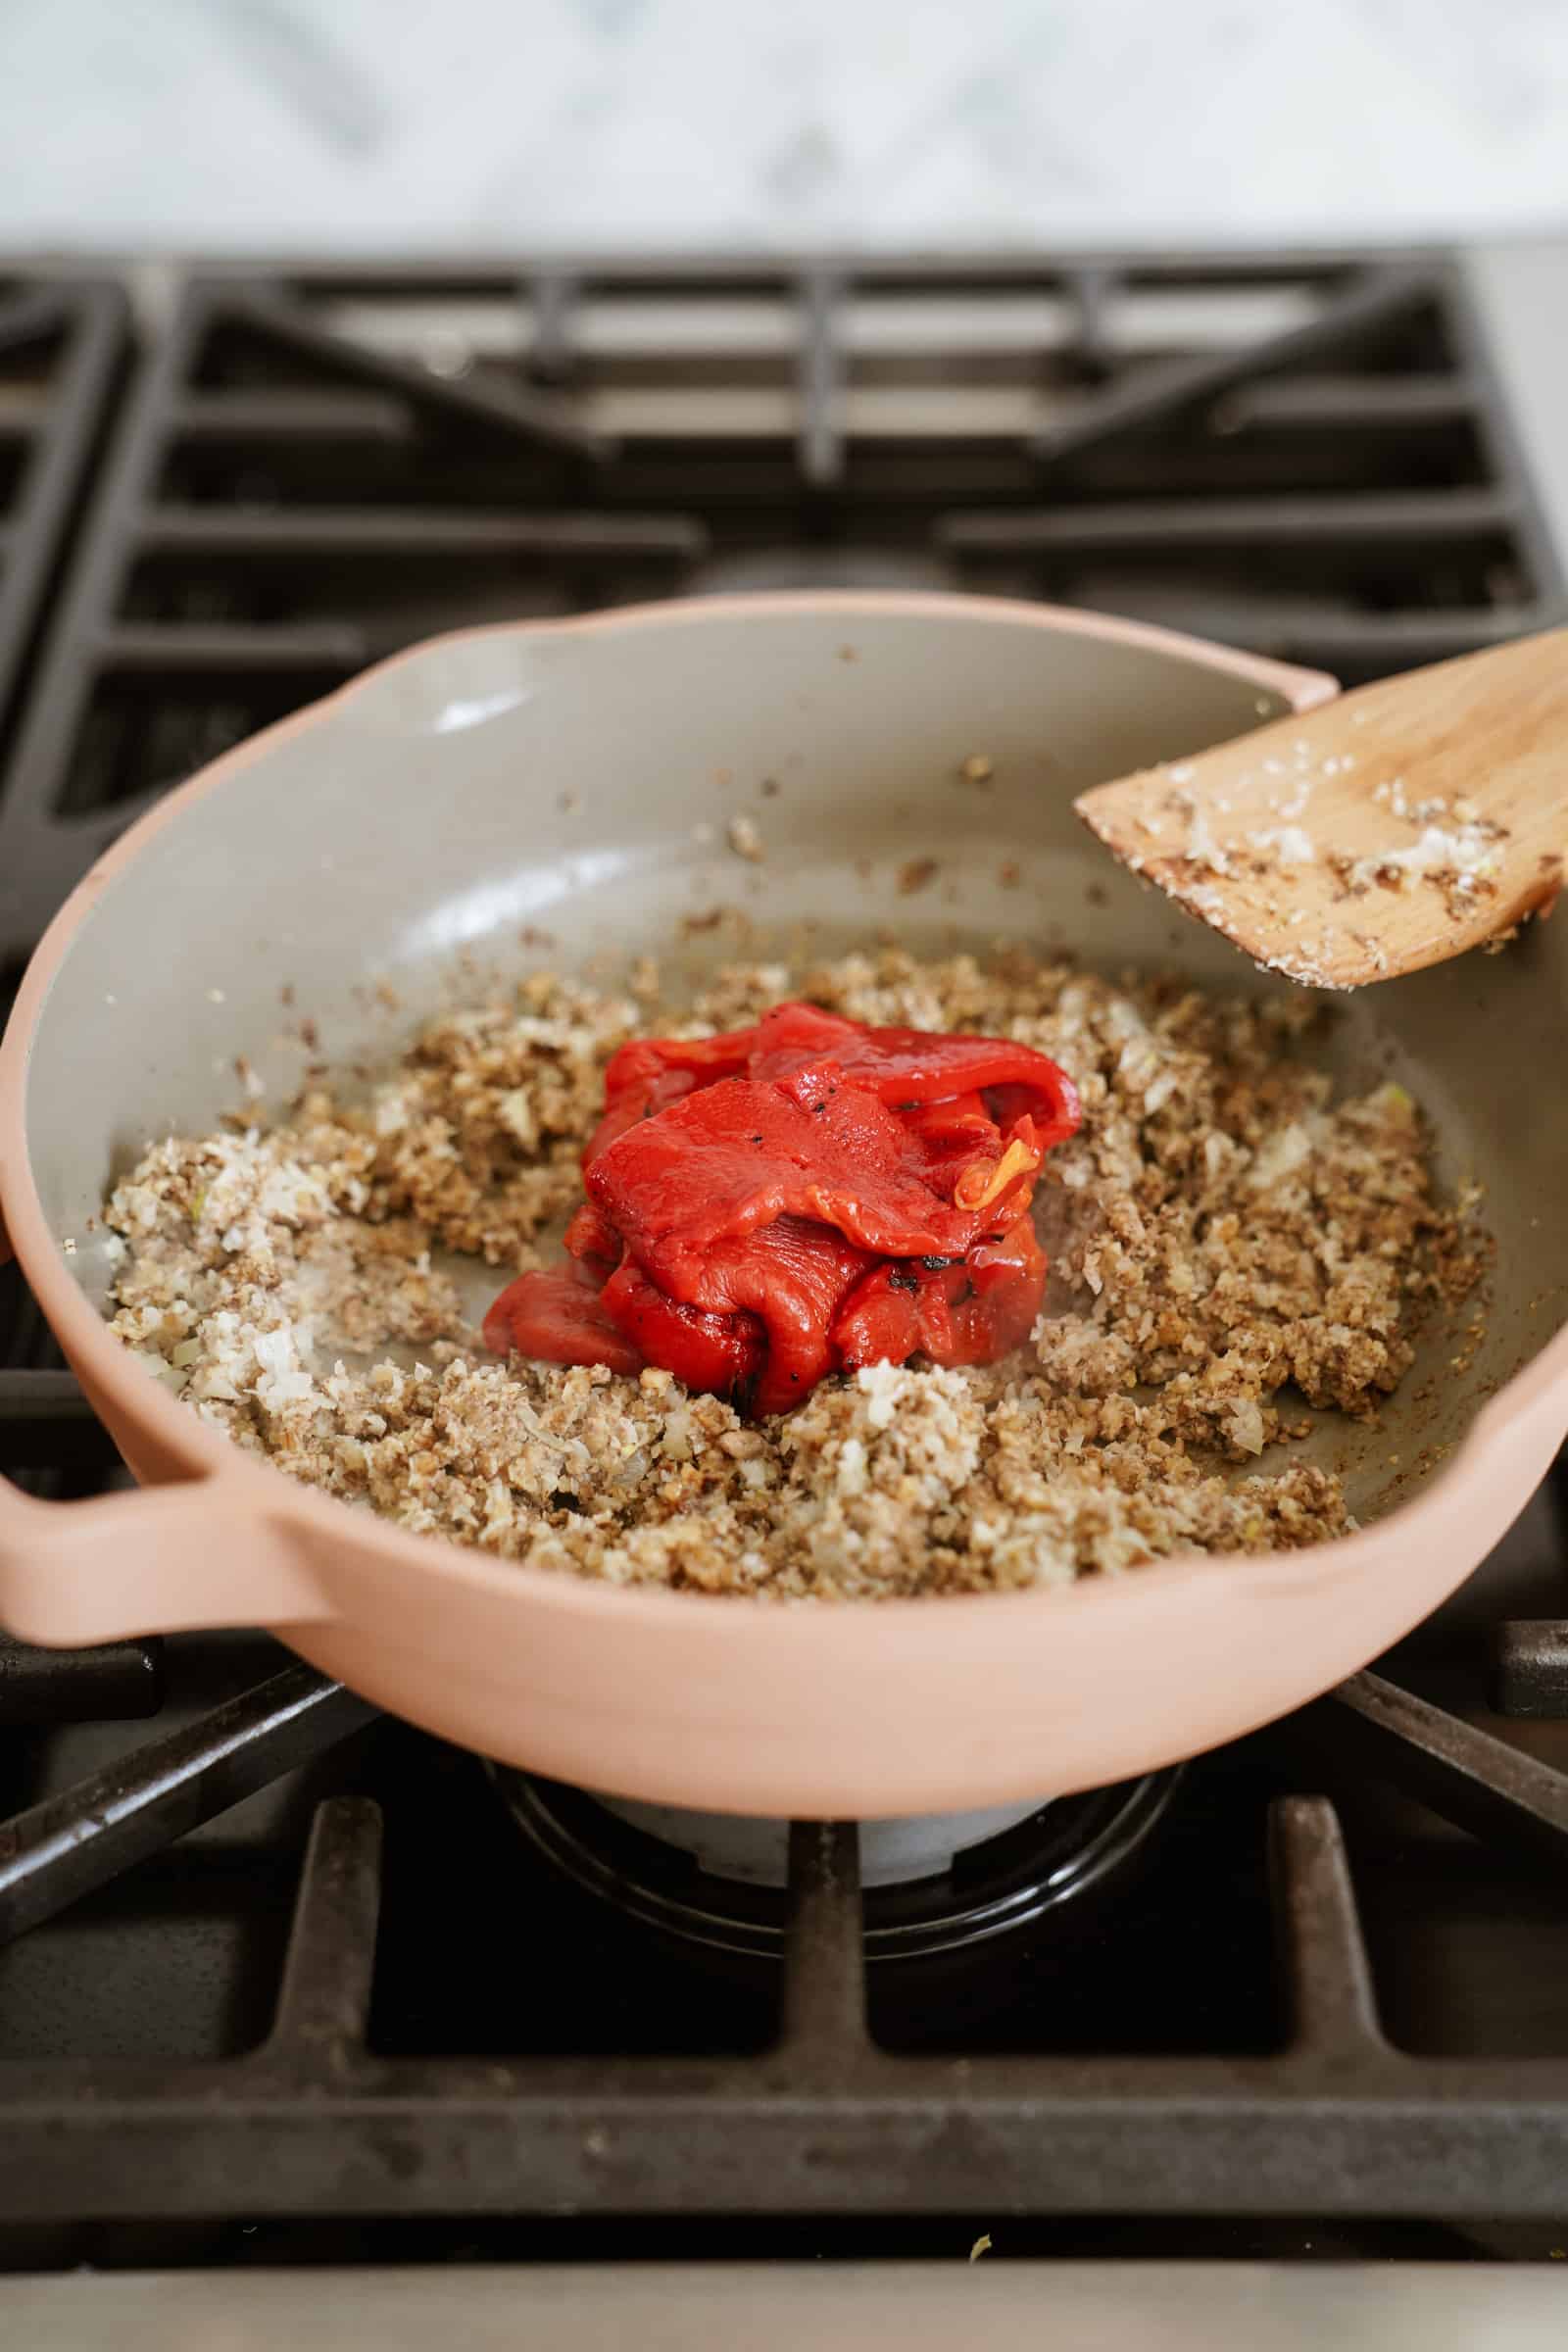 Roasted red peppers in a pan with walnut meat